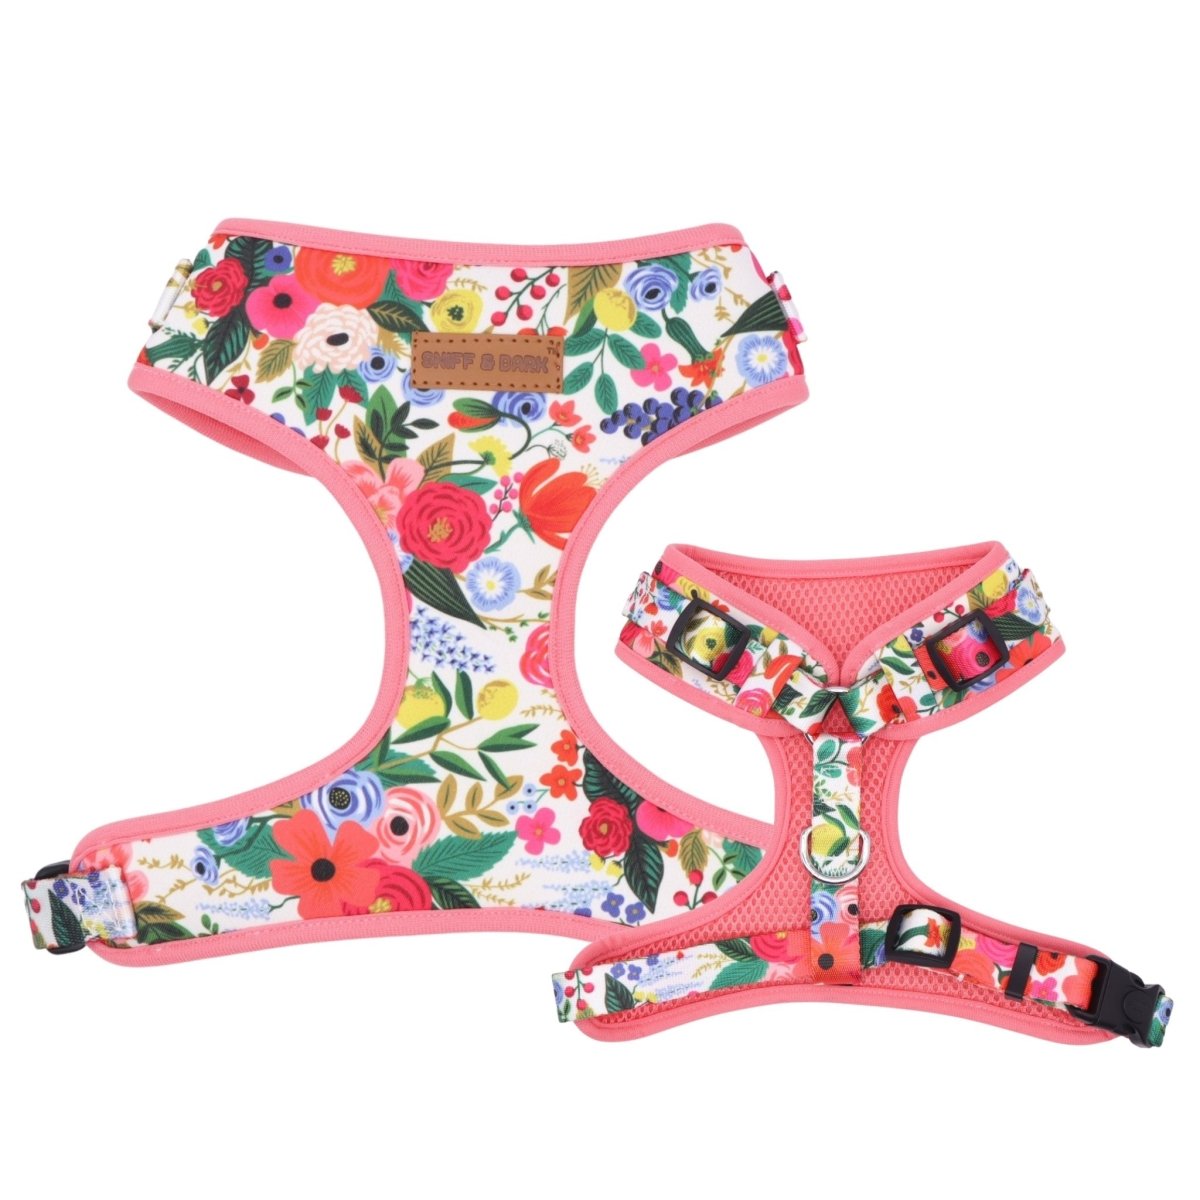 best escape proof dog harness - best dog harness canada - Floral harness for dogs 